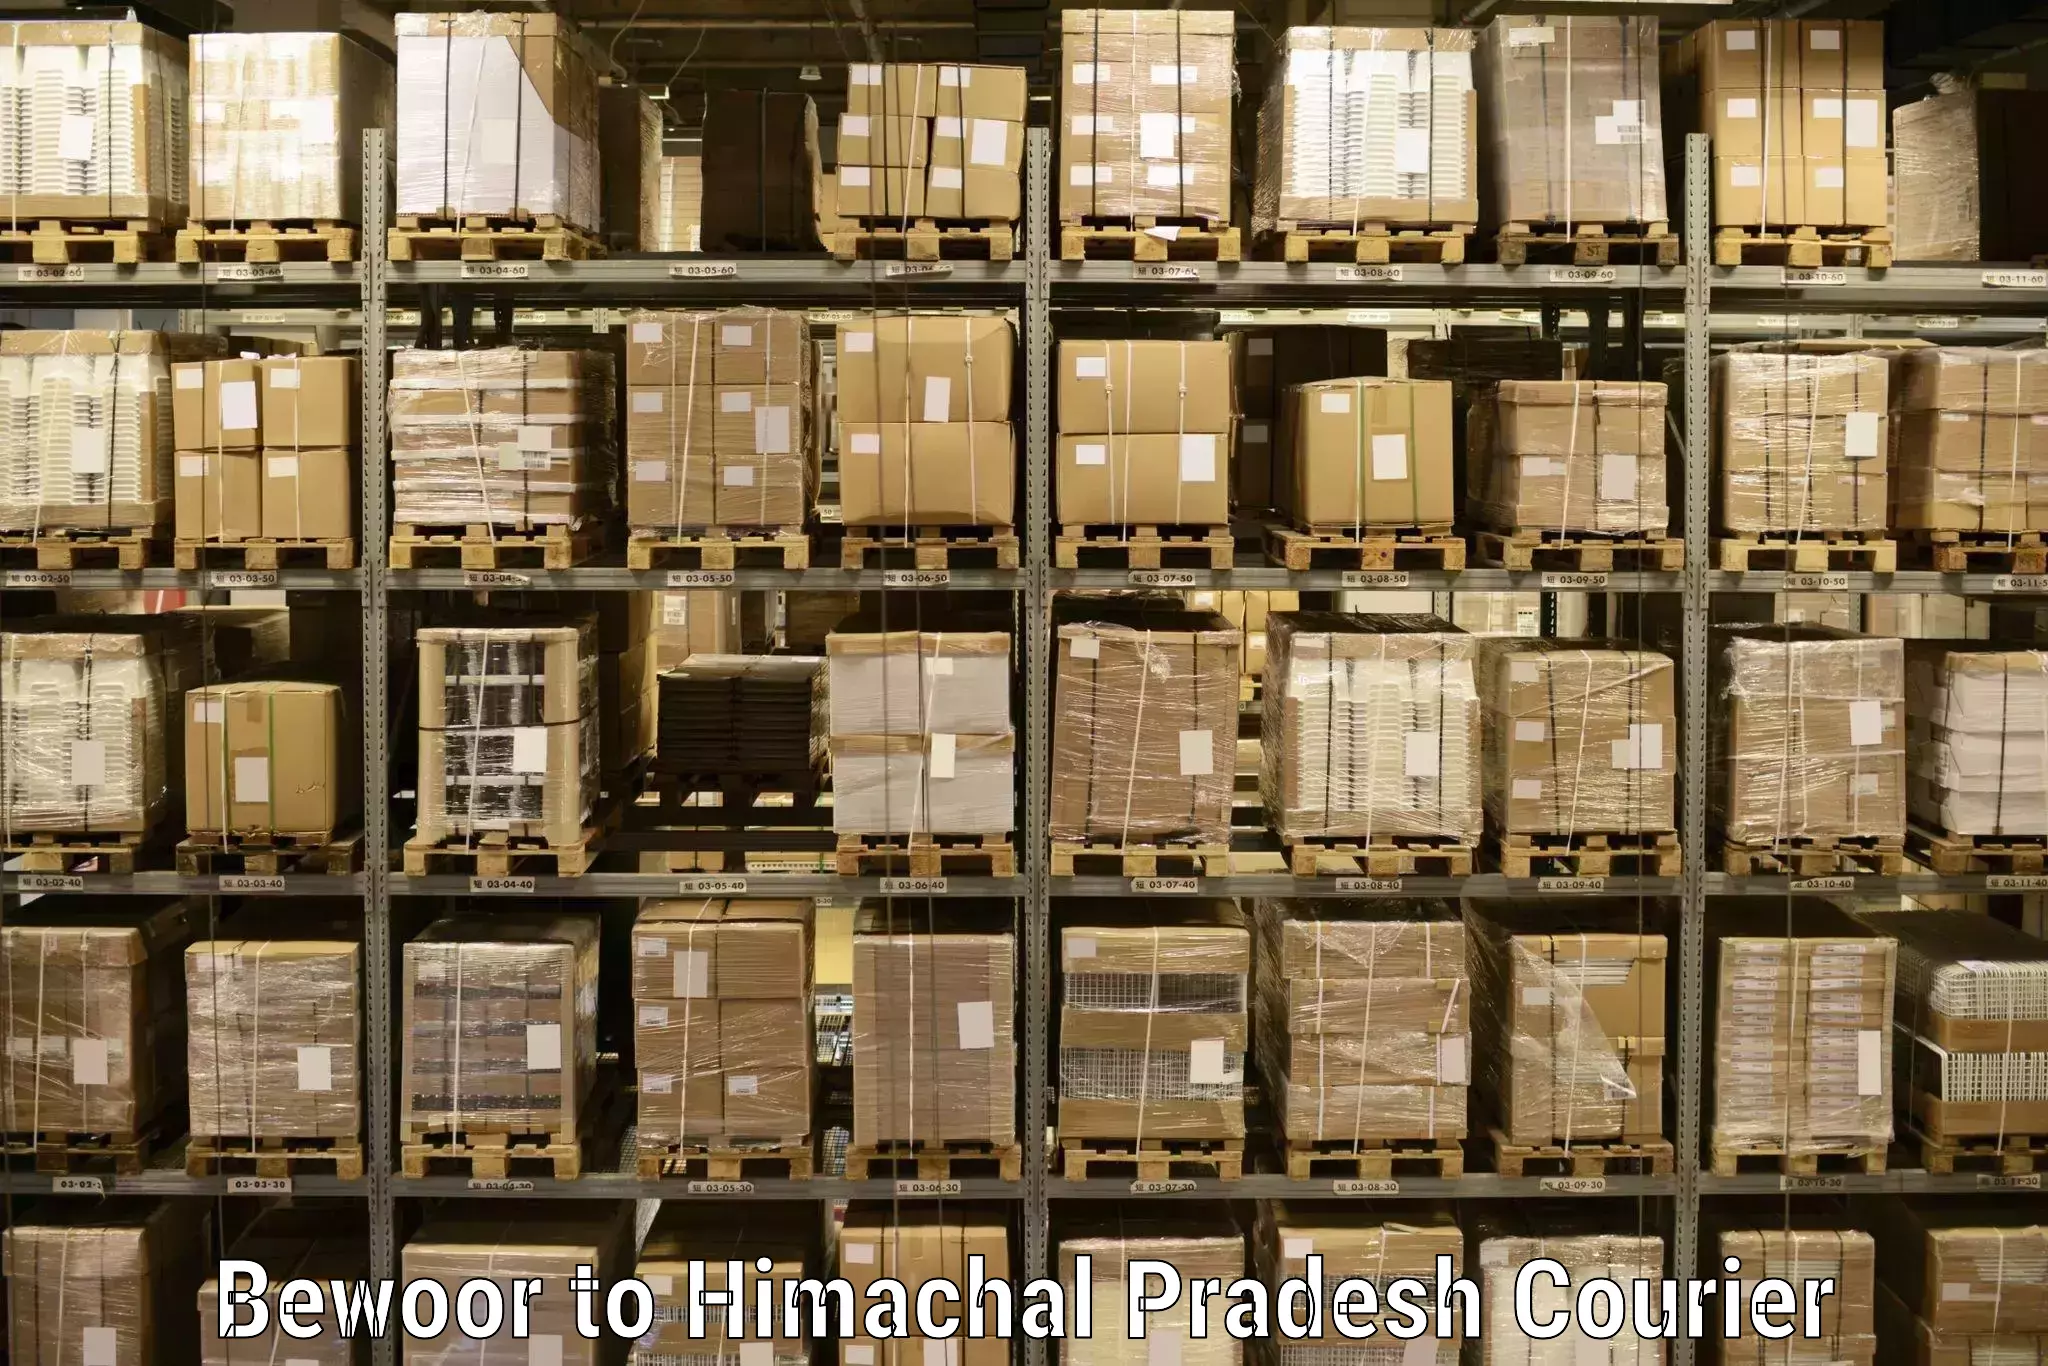 Professional parcel services in Bewoor to Jukhala